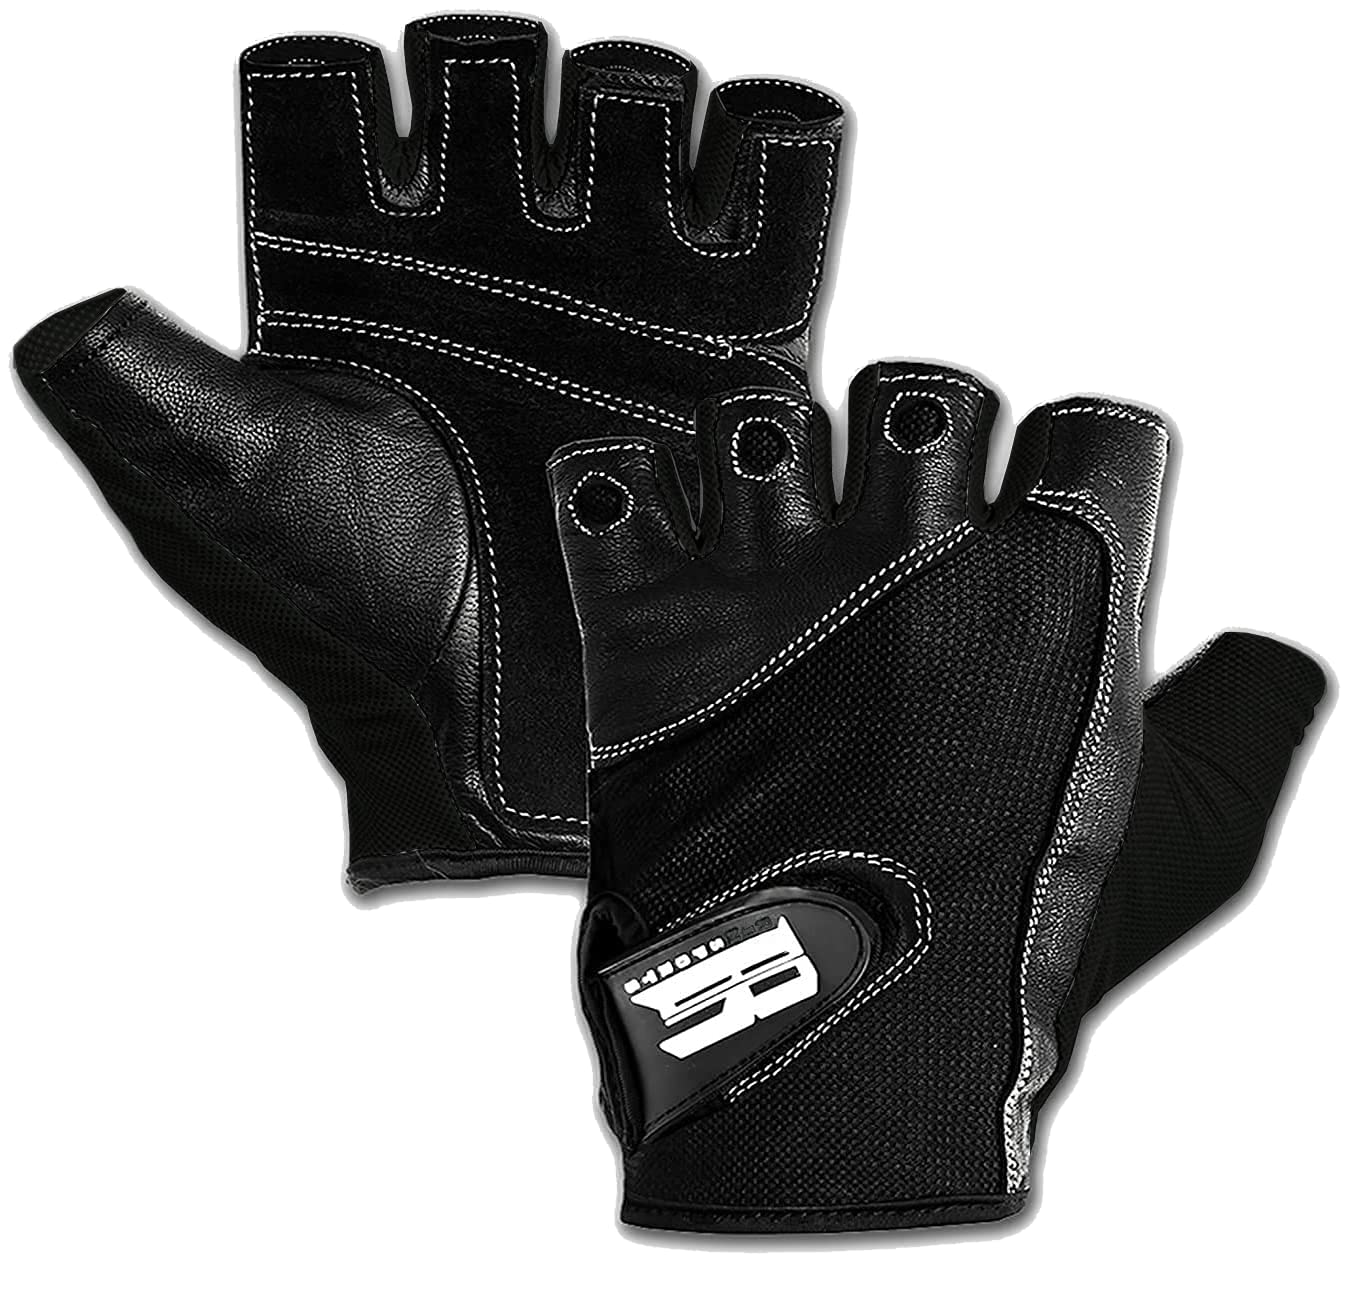 RIMSports Workout Gloves for Men and Women - Breathable Weight Lifting Gloves for Gym, Exercise, Weightlifting, Cycling, Rowing, Training Leather Palm Padded Thumb Protected Against Calluses Blister Black Large